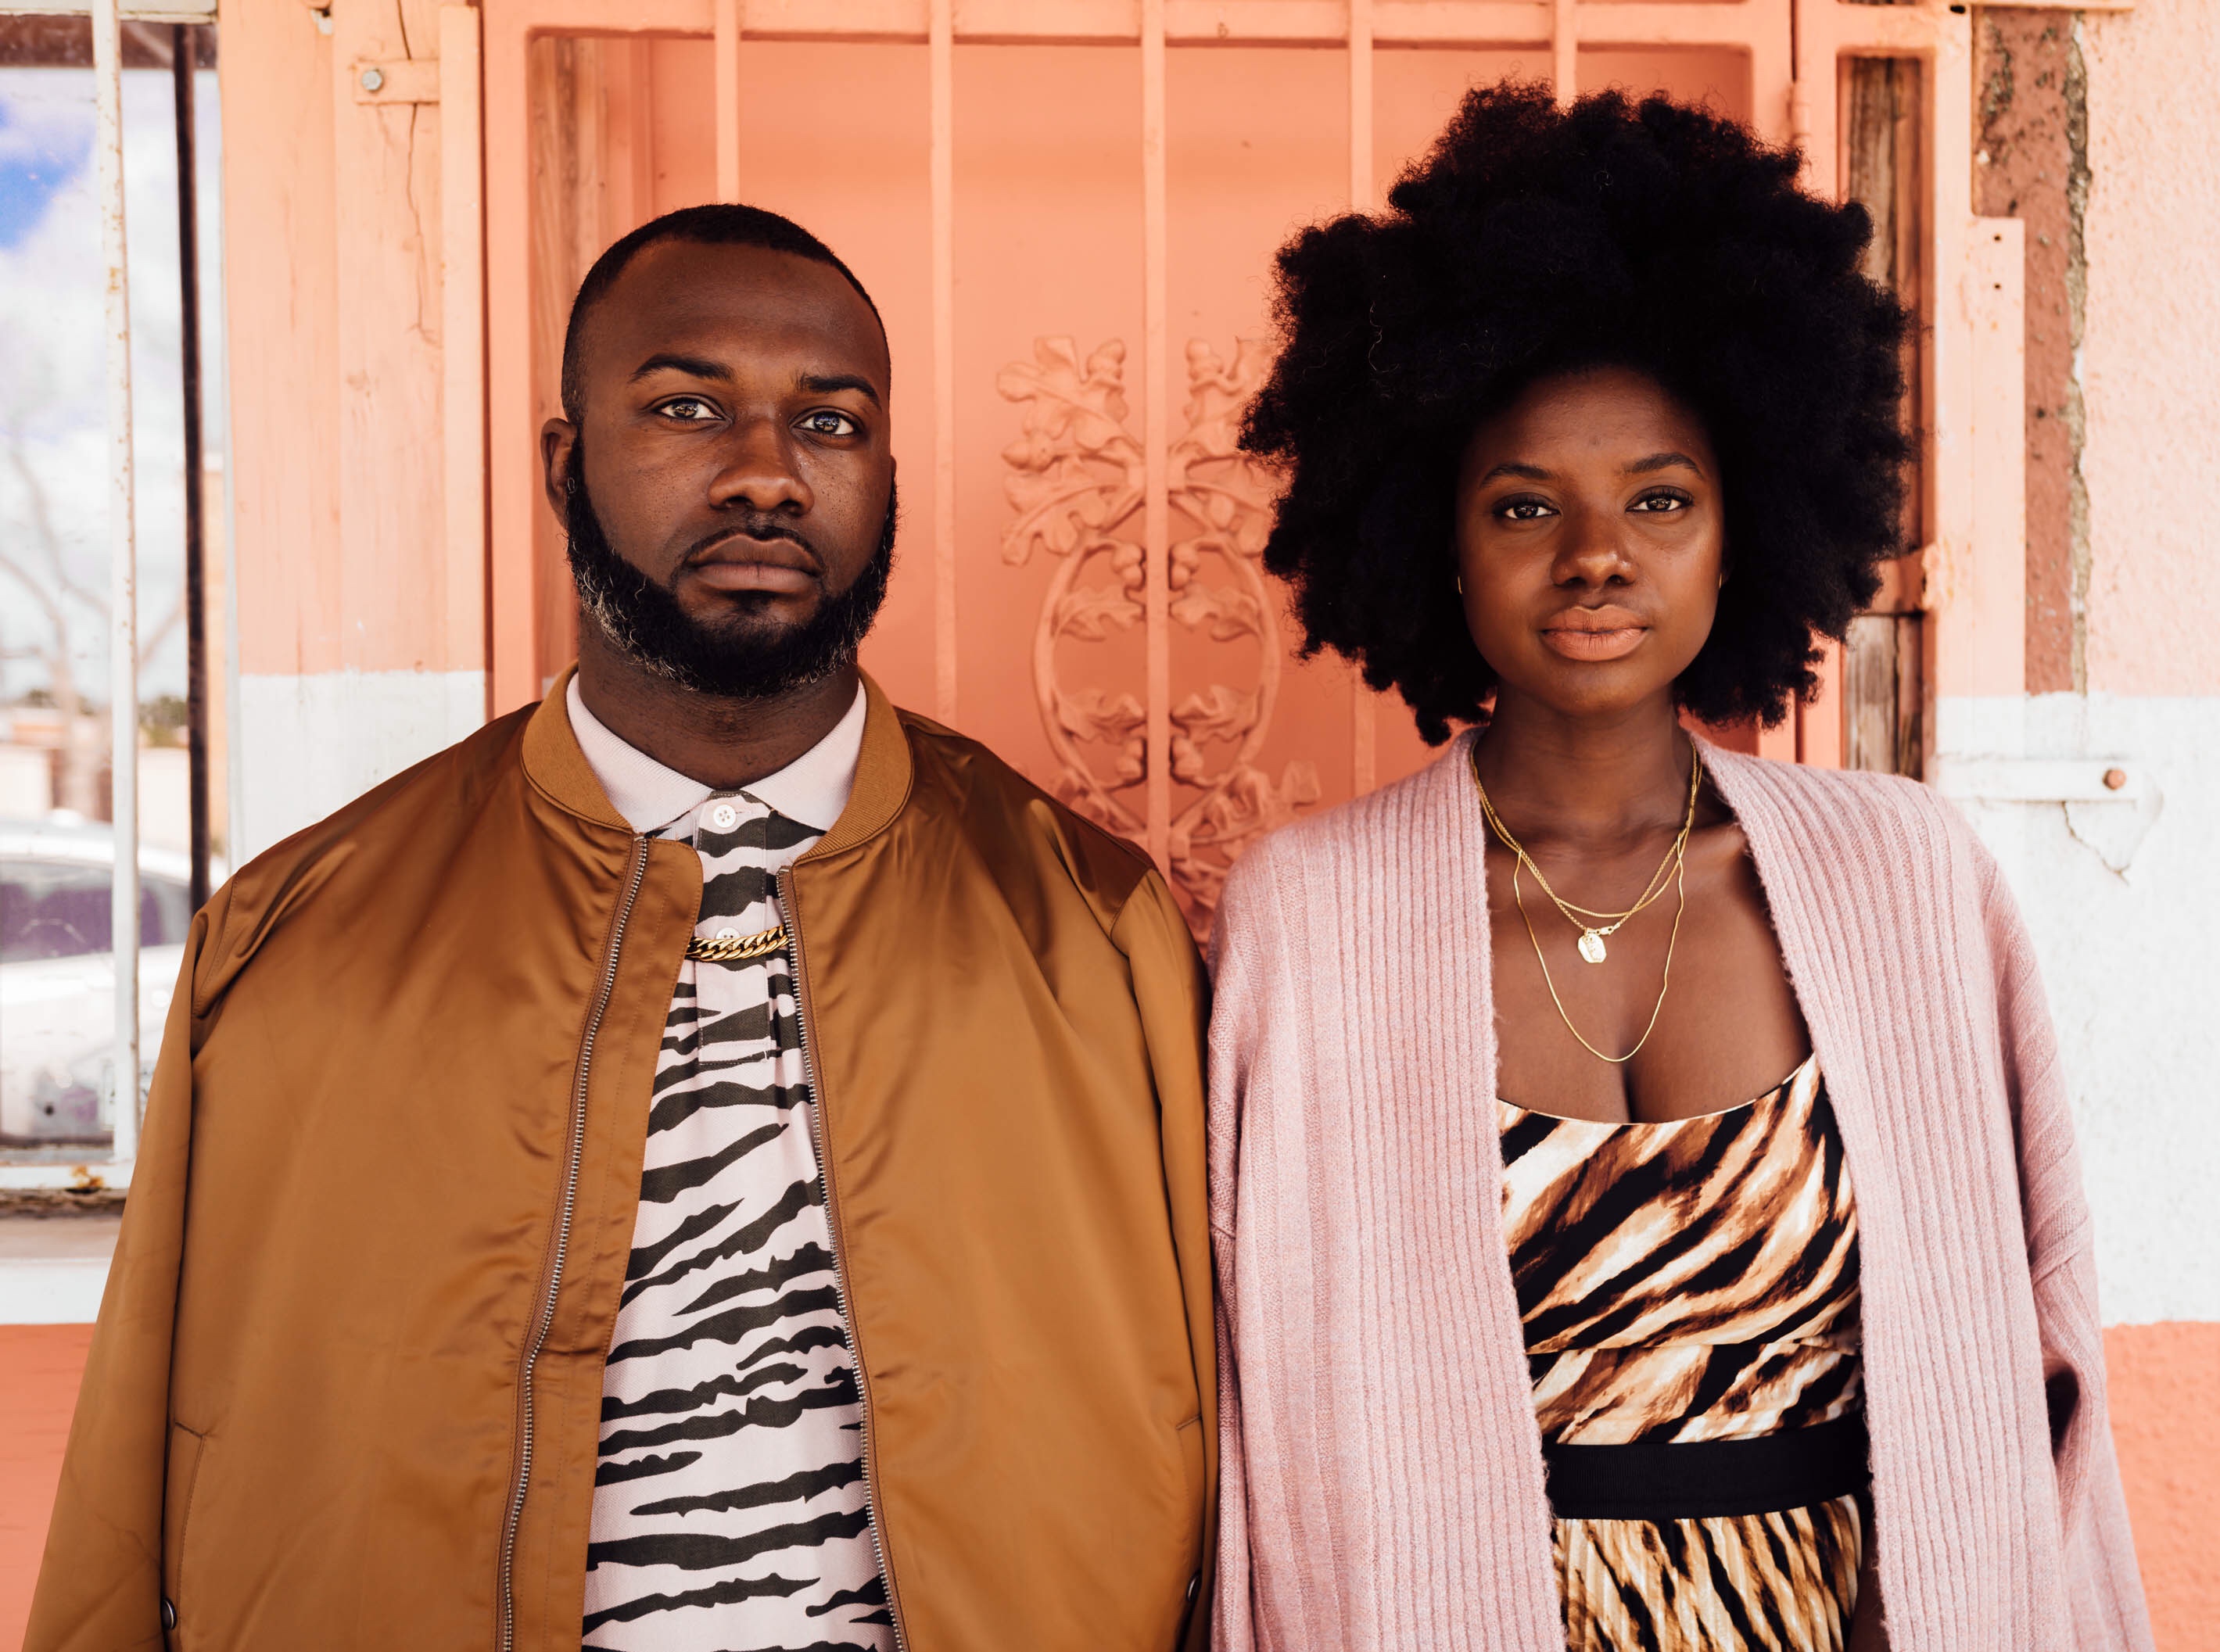 mens fall fashion, nordstroms mens wear, salt and pepper beard, tiger pique polo, tiger camisole, tiger skirt, brother and sister photos, houston bloggers, black houston blogger, black fashion blogger, 4b afro, 4b hair, 4c hair, 4c afro, natural hair afro